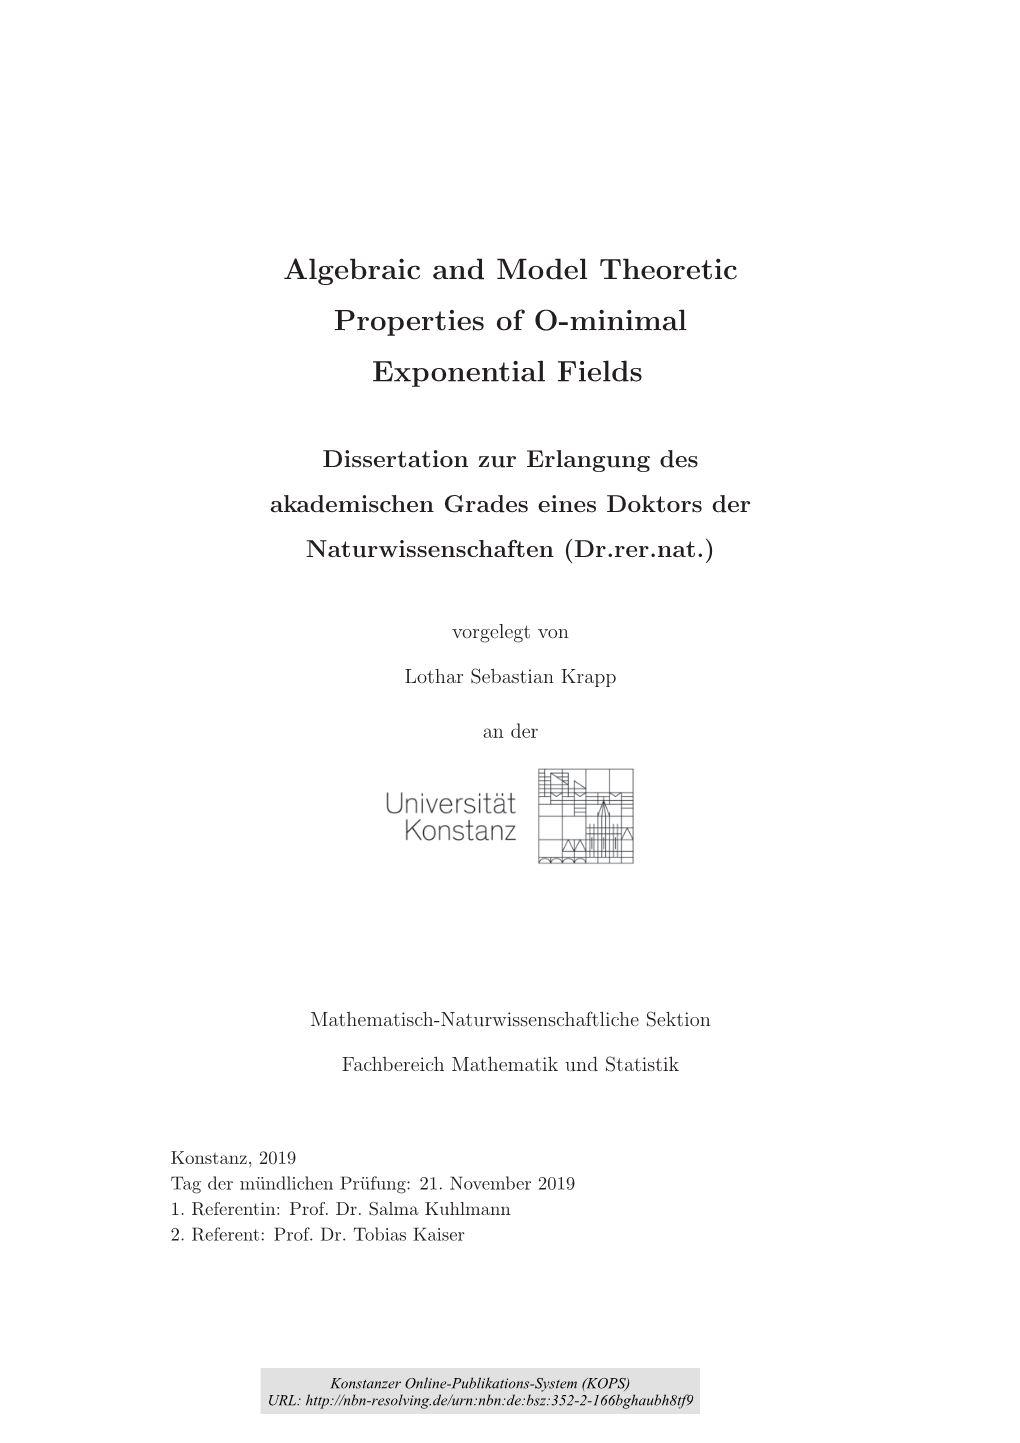 Algebraic and Model Theoretic Properties of O-Minimal Exponential Fields